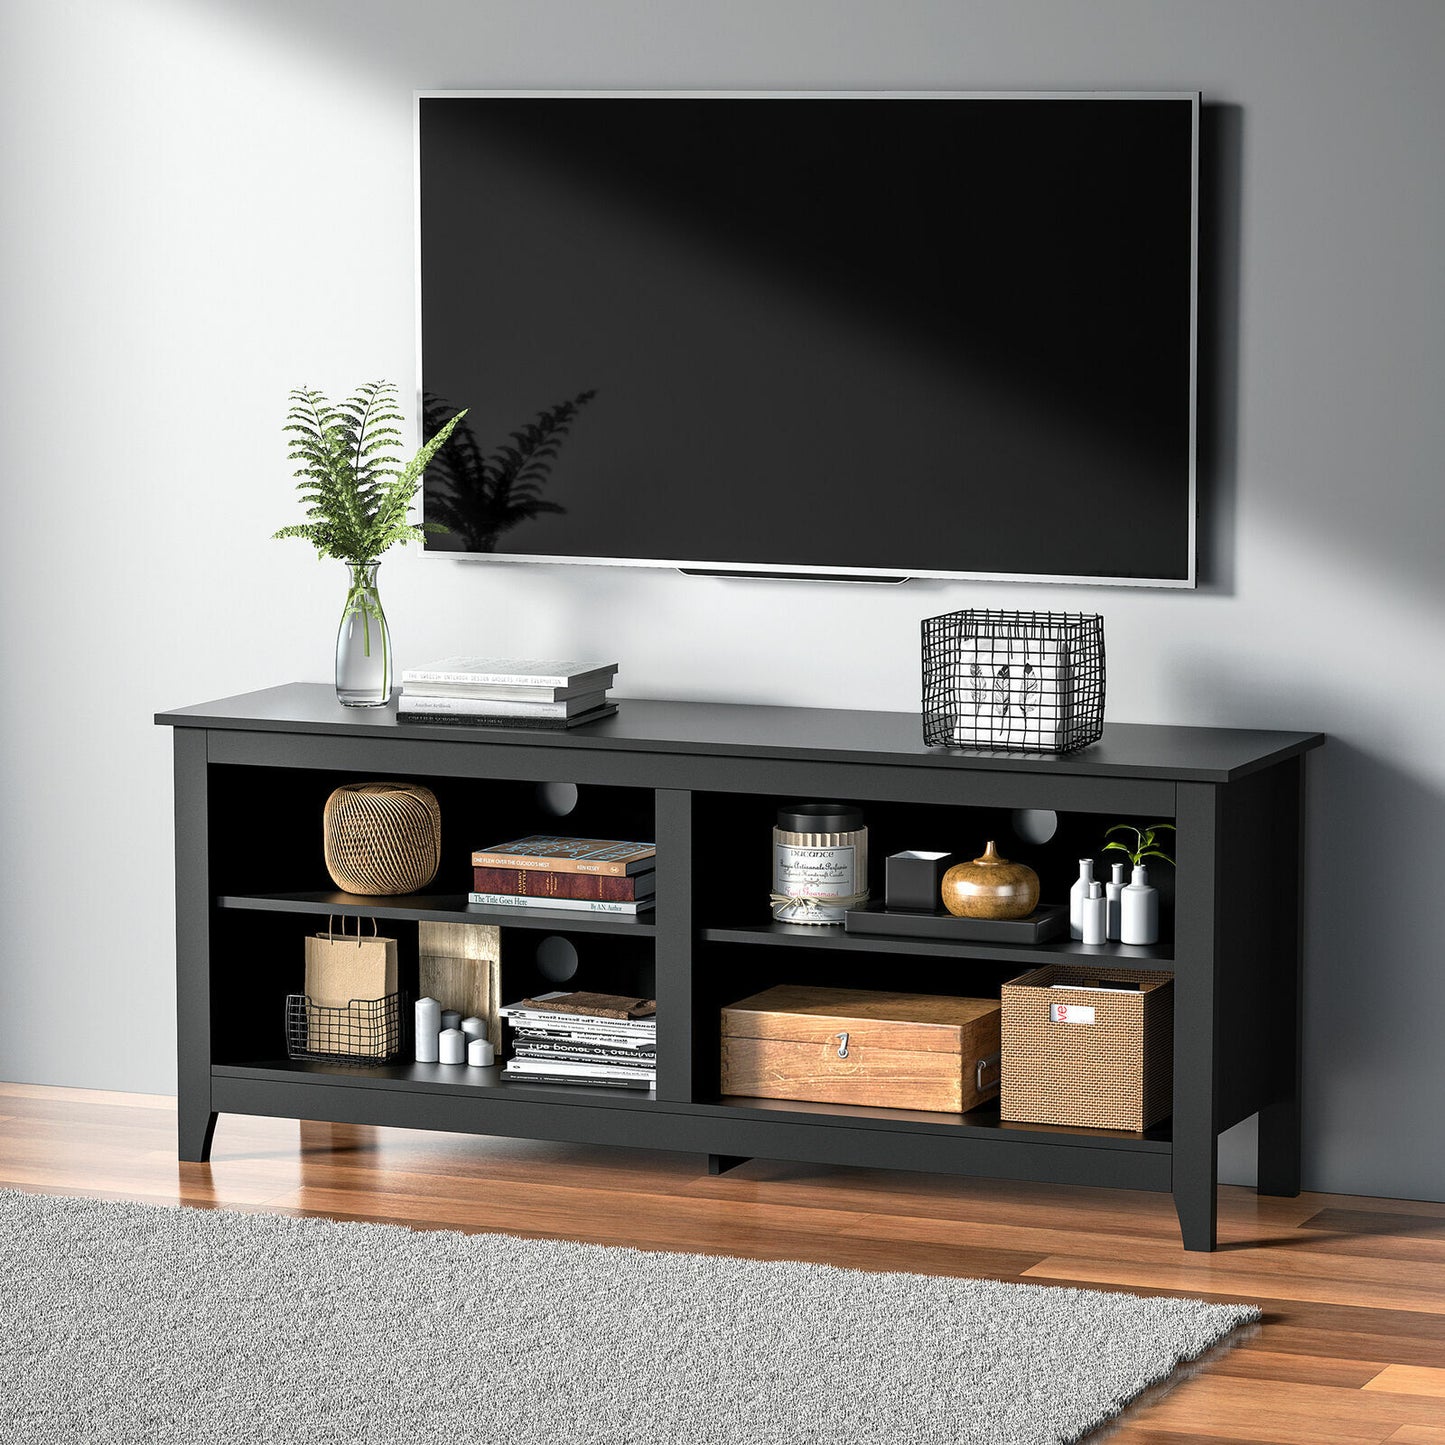 58“ Home Living Room TV Stand Up to 65" Display 3 Tiers Classic Black 4 Cubbies